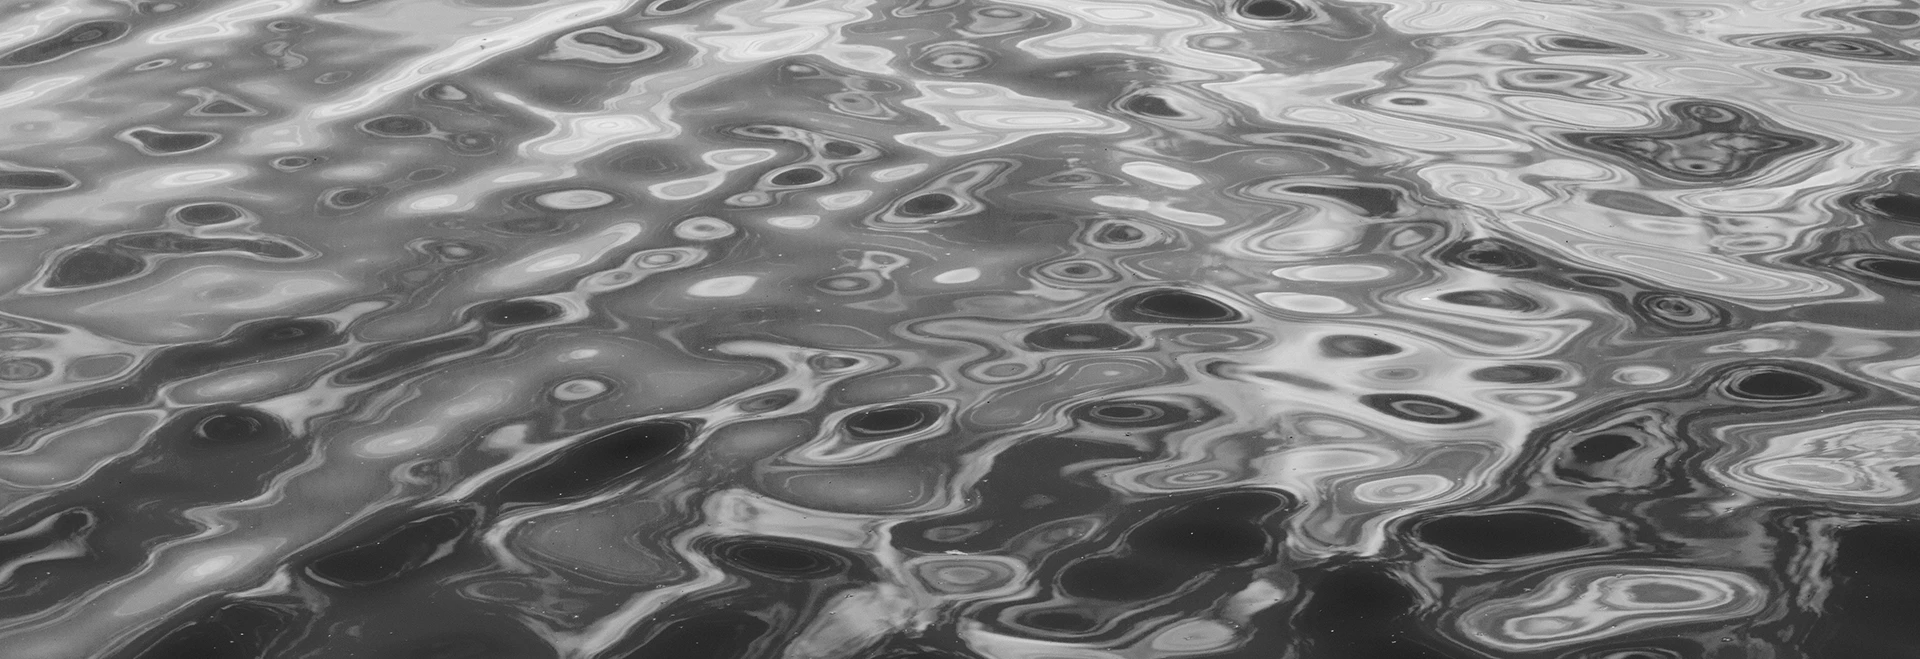 This is an image of rippling water